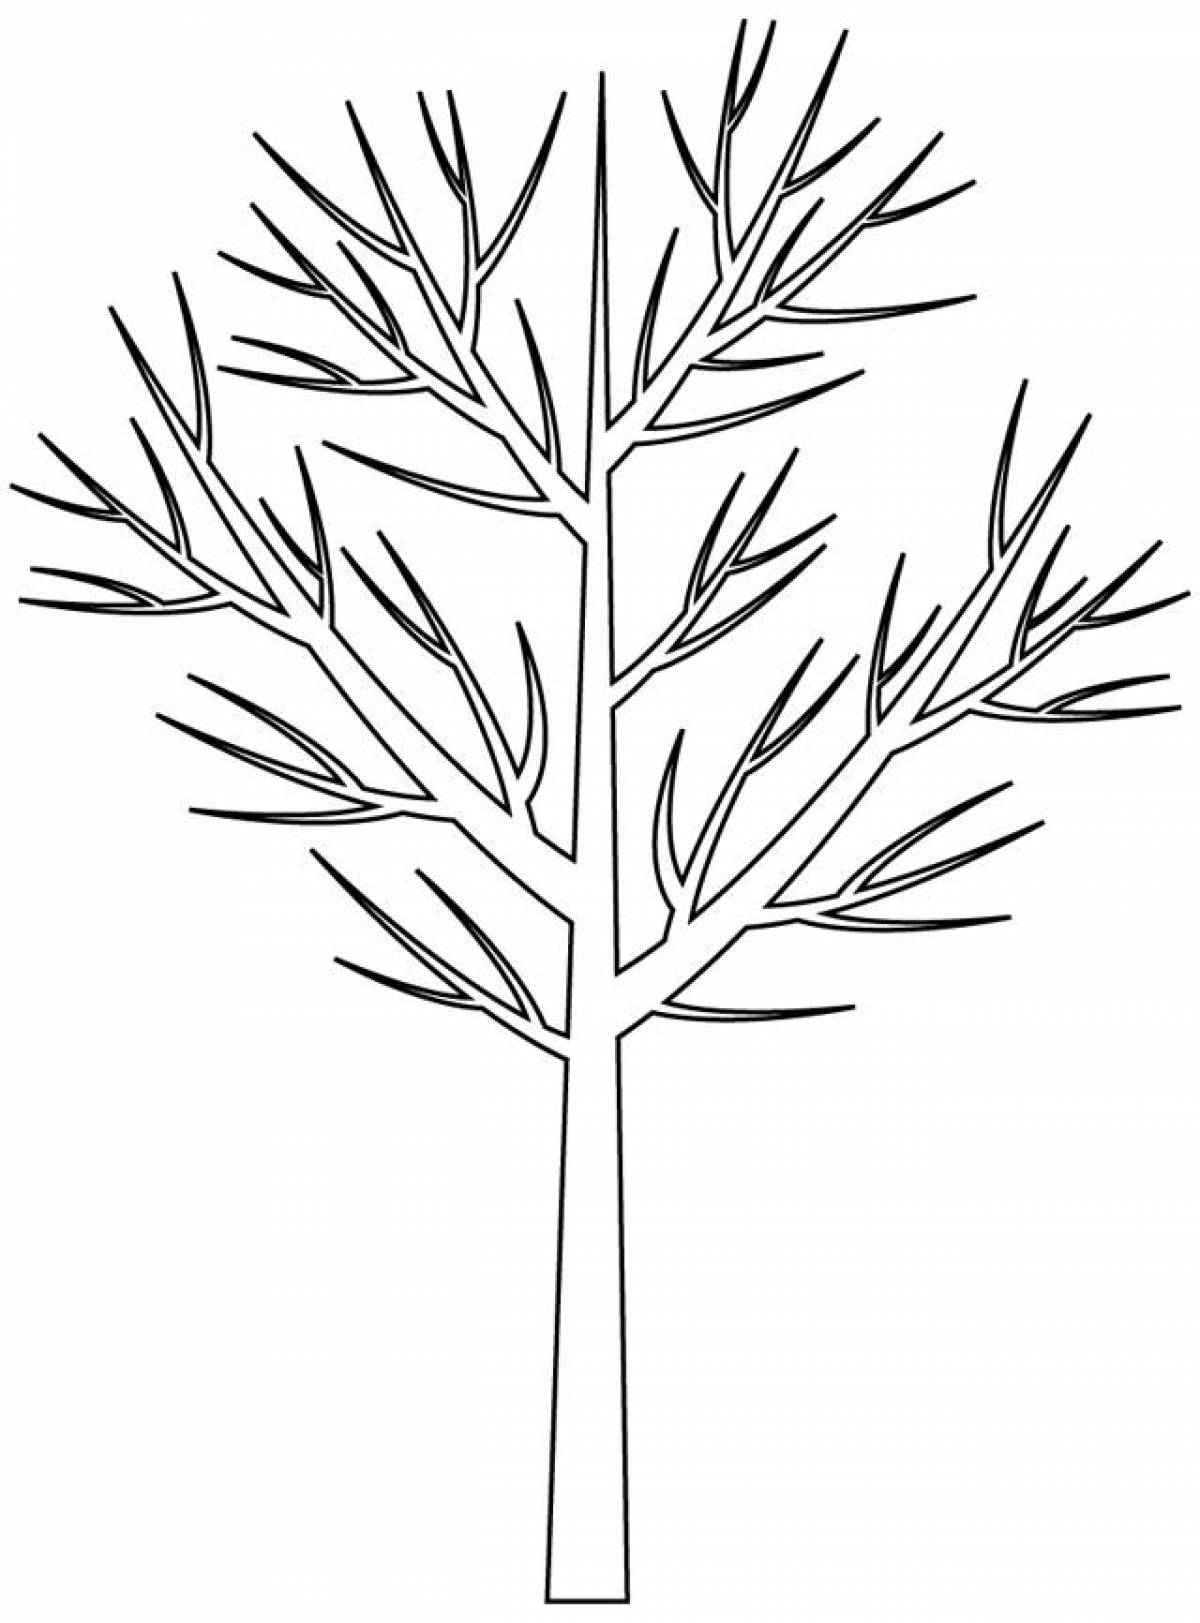 A dazzling tree without leaves coloring pages for children